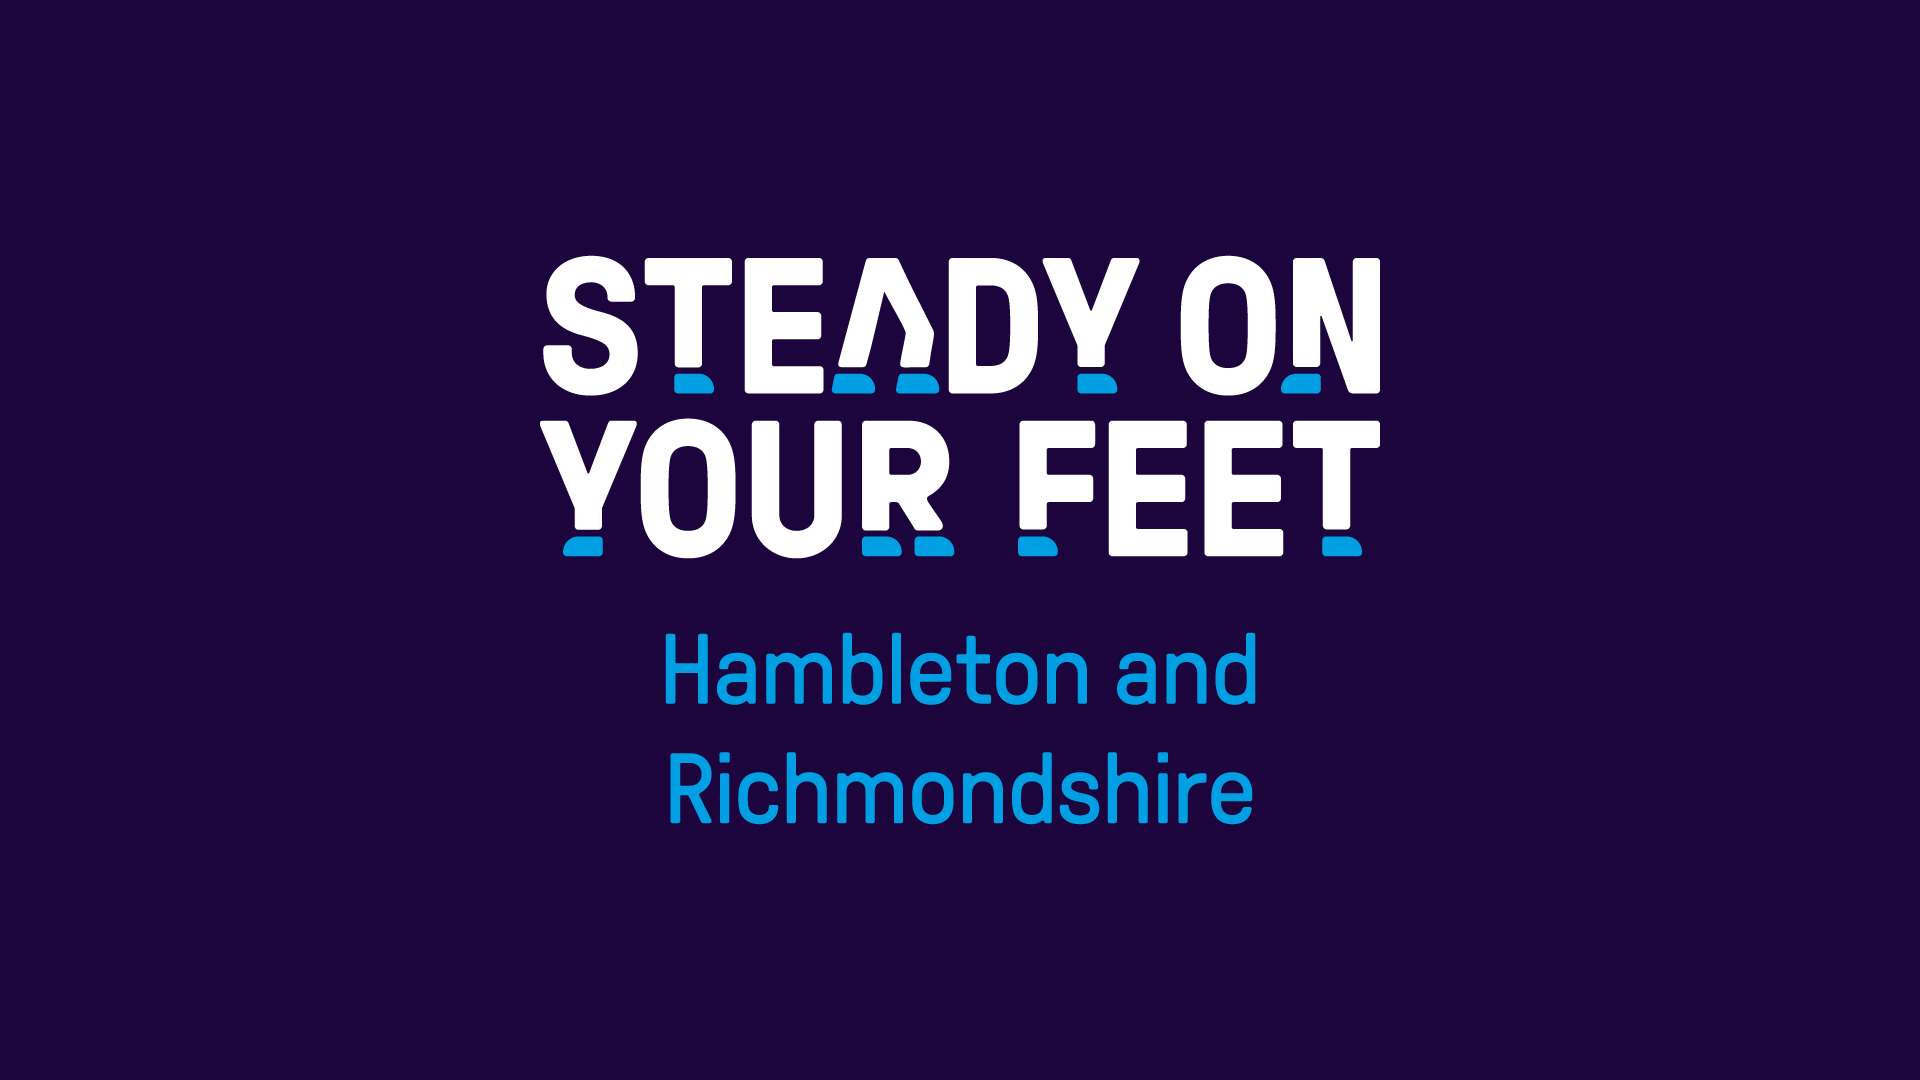 Steady On Your Feet launches innovative falls prevention platform in Hambleton and Richmondshire